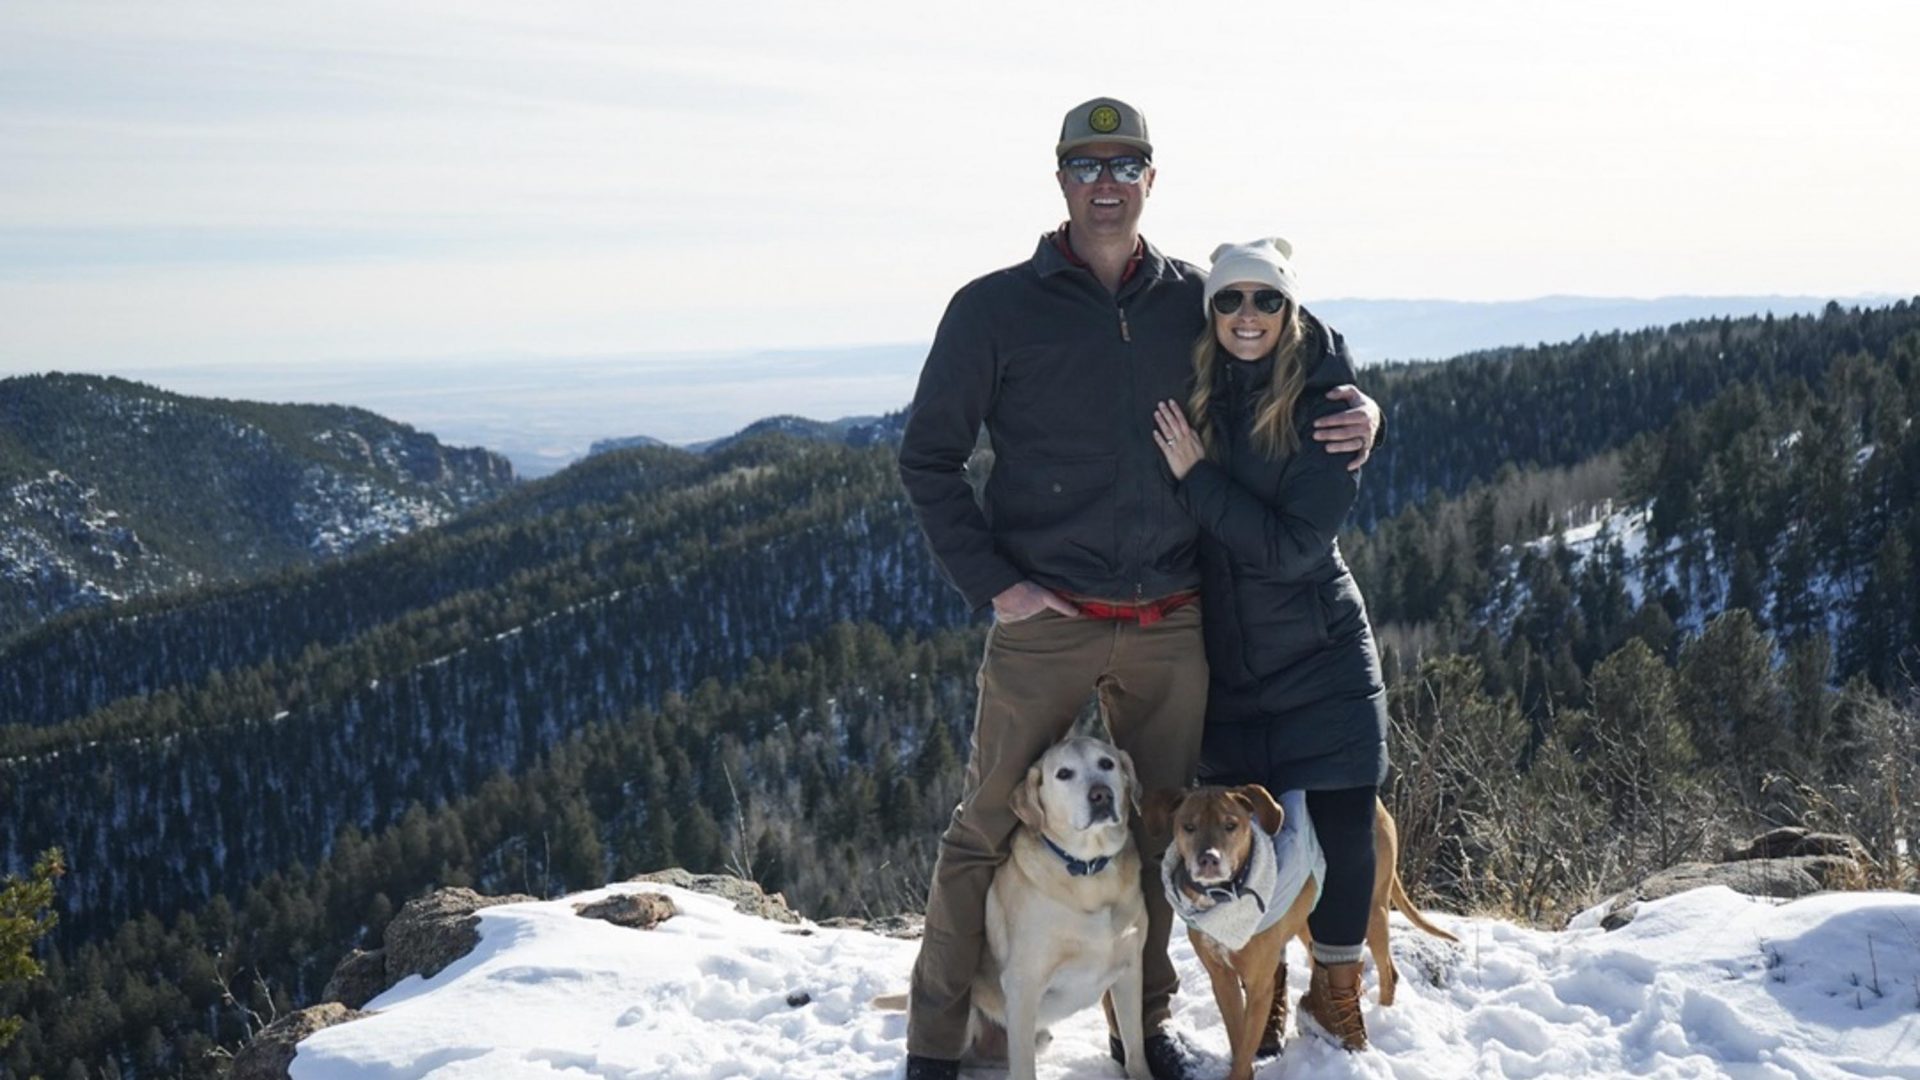 A man and a woman stand on a snowy mountain, backed by trees, with their two dogs.